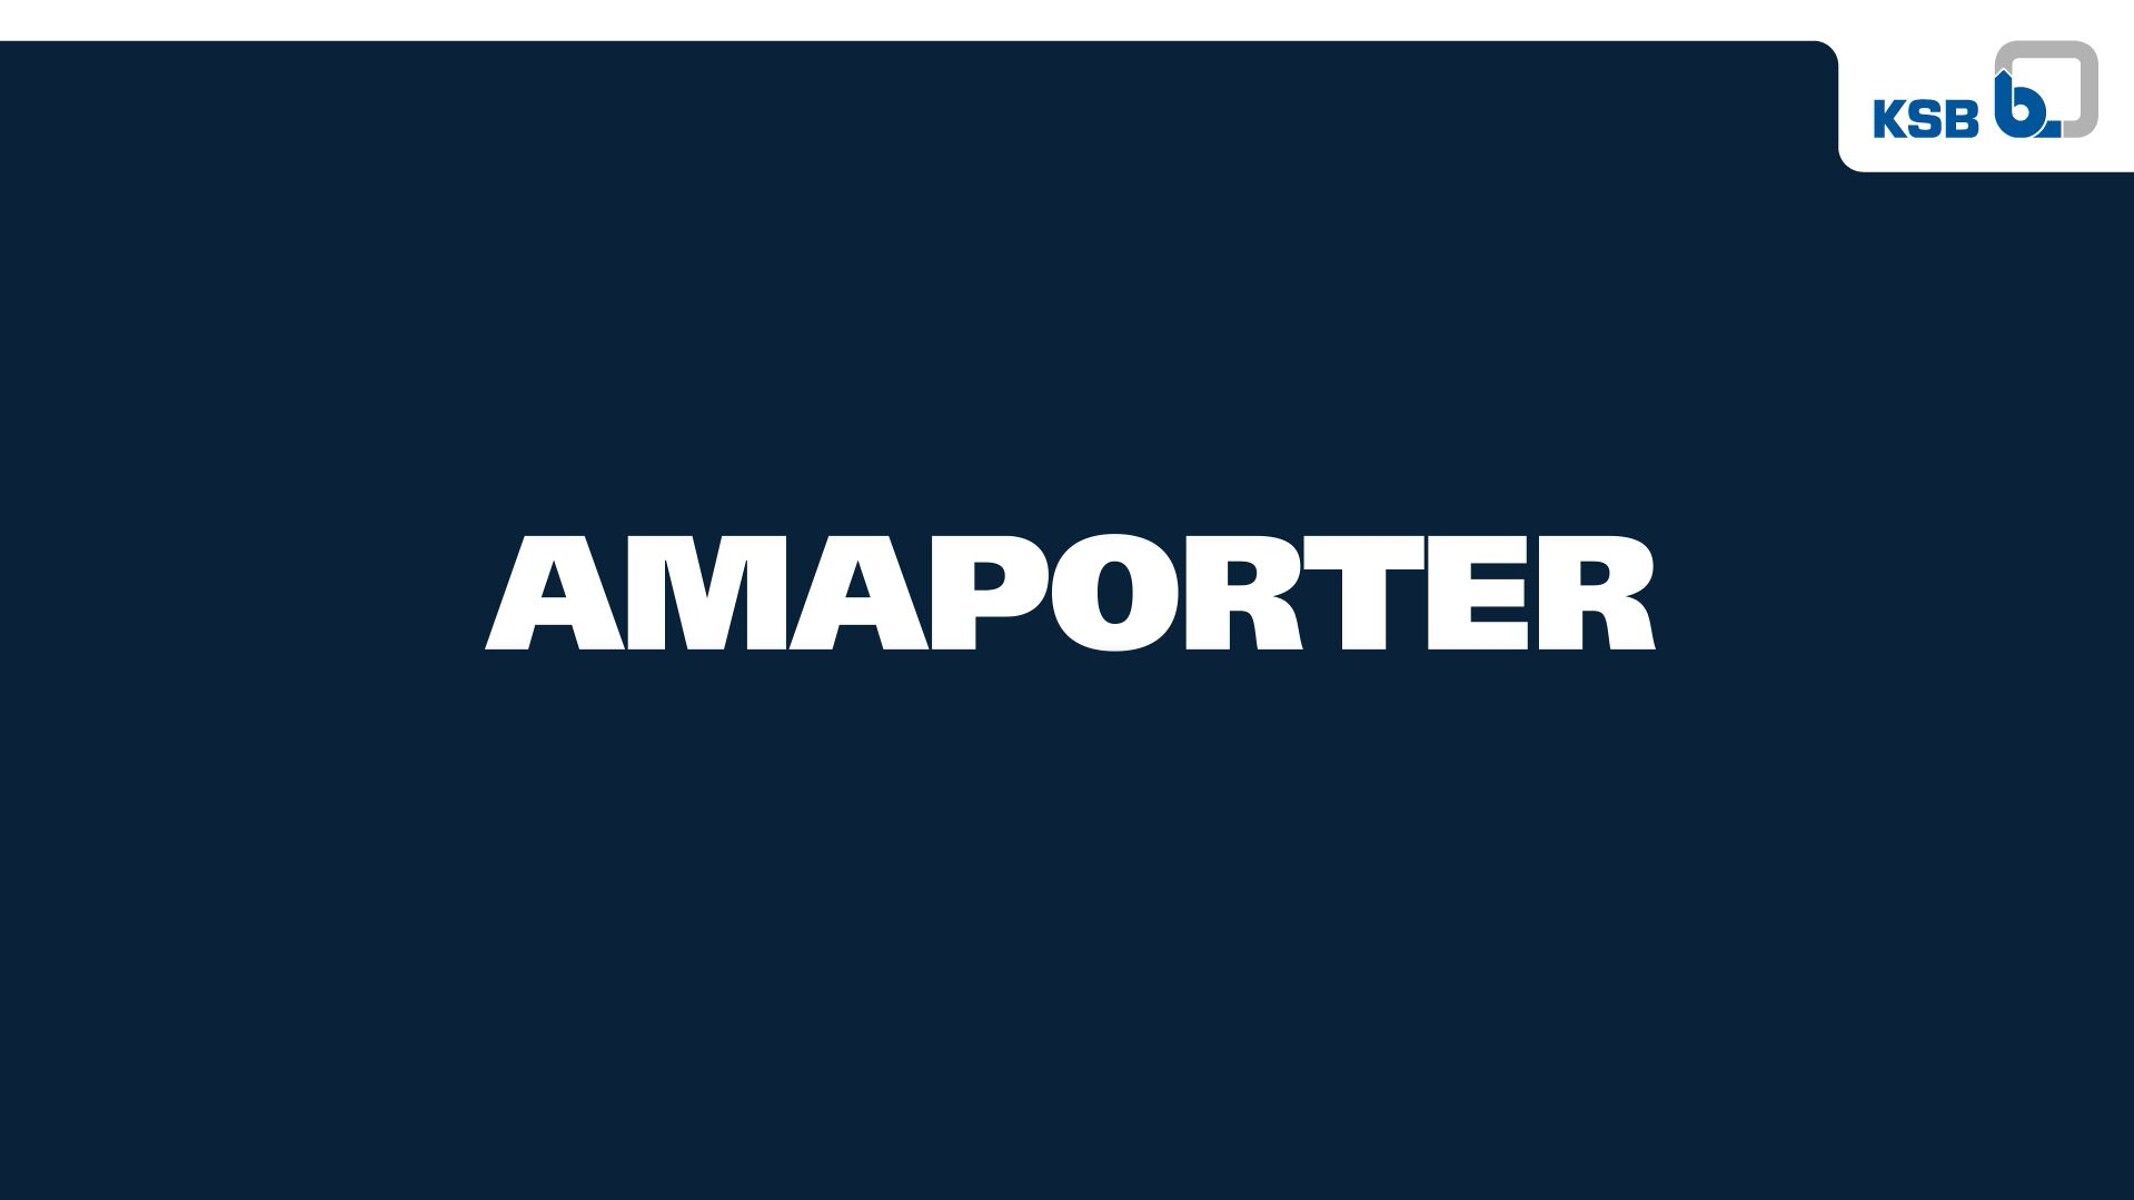 KSB AmaPorter video: Easy. For everyone.